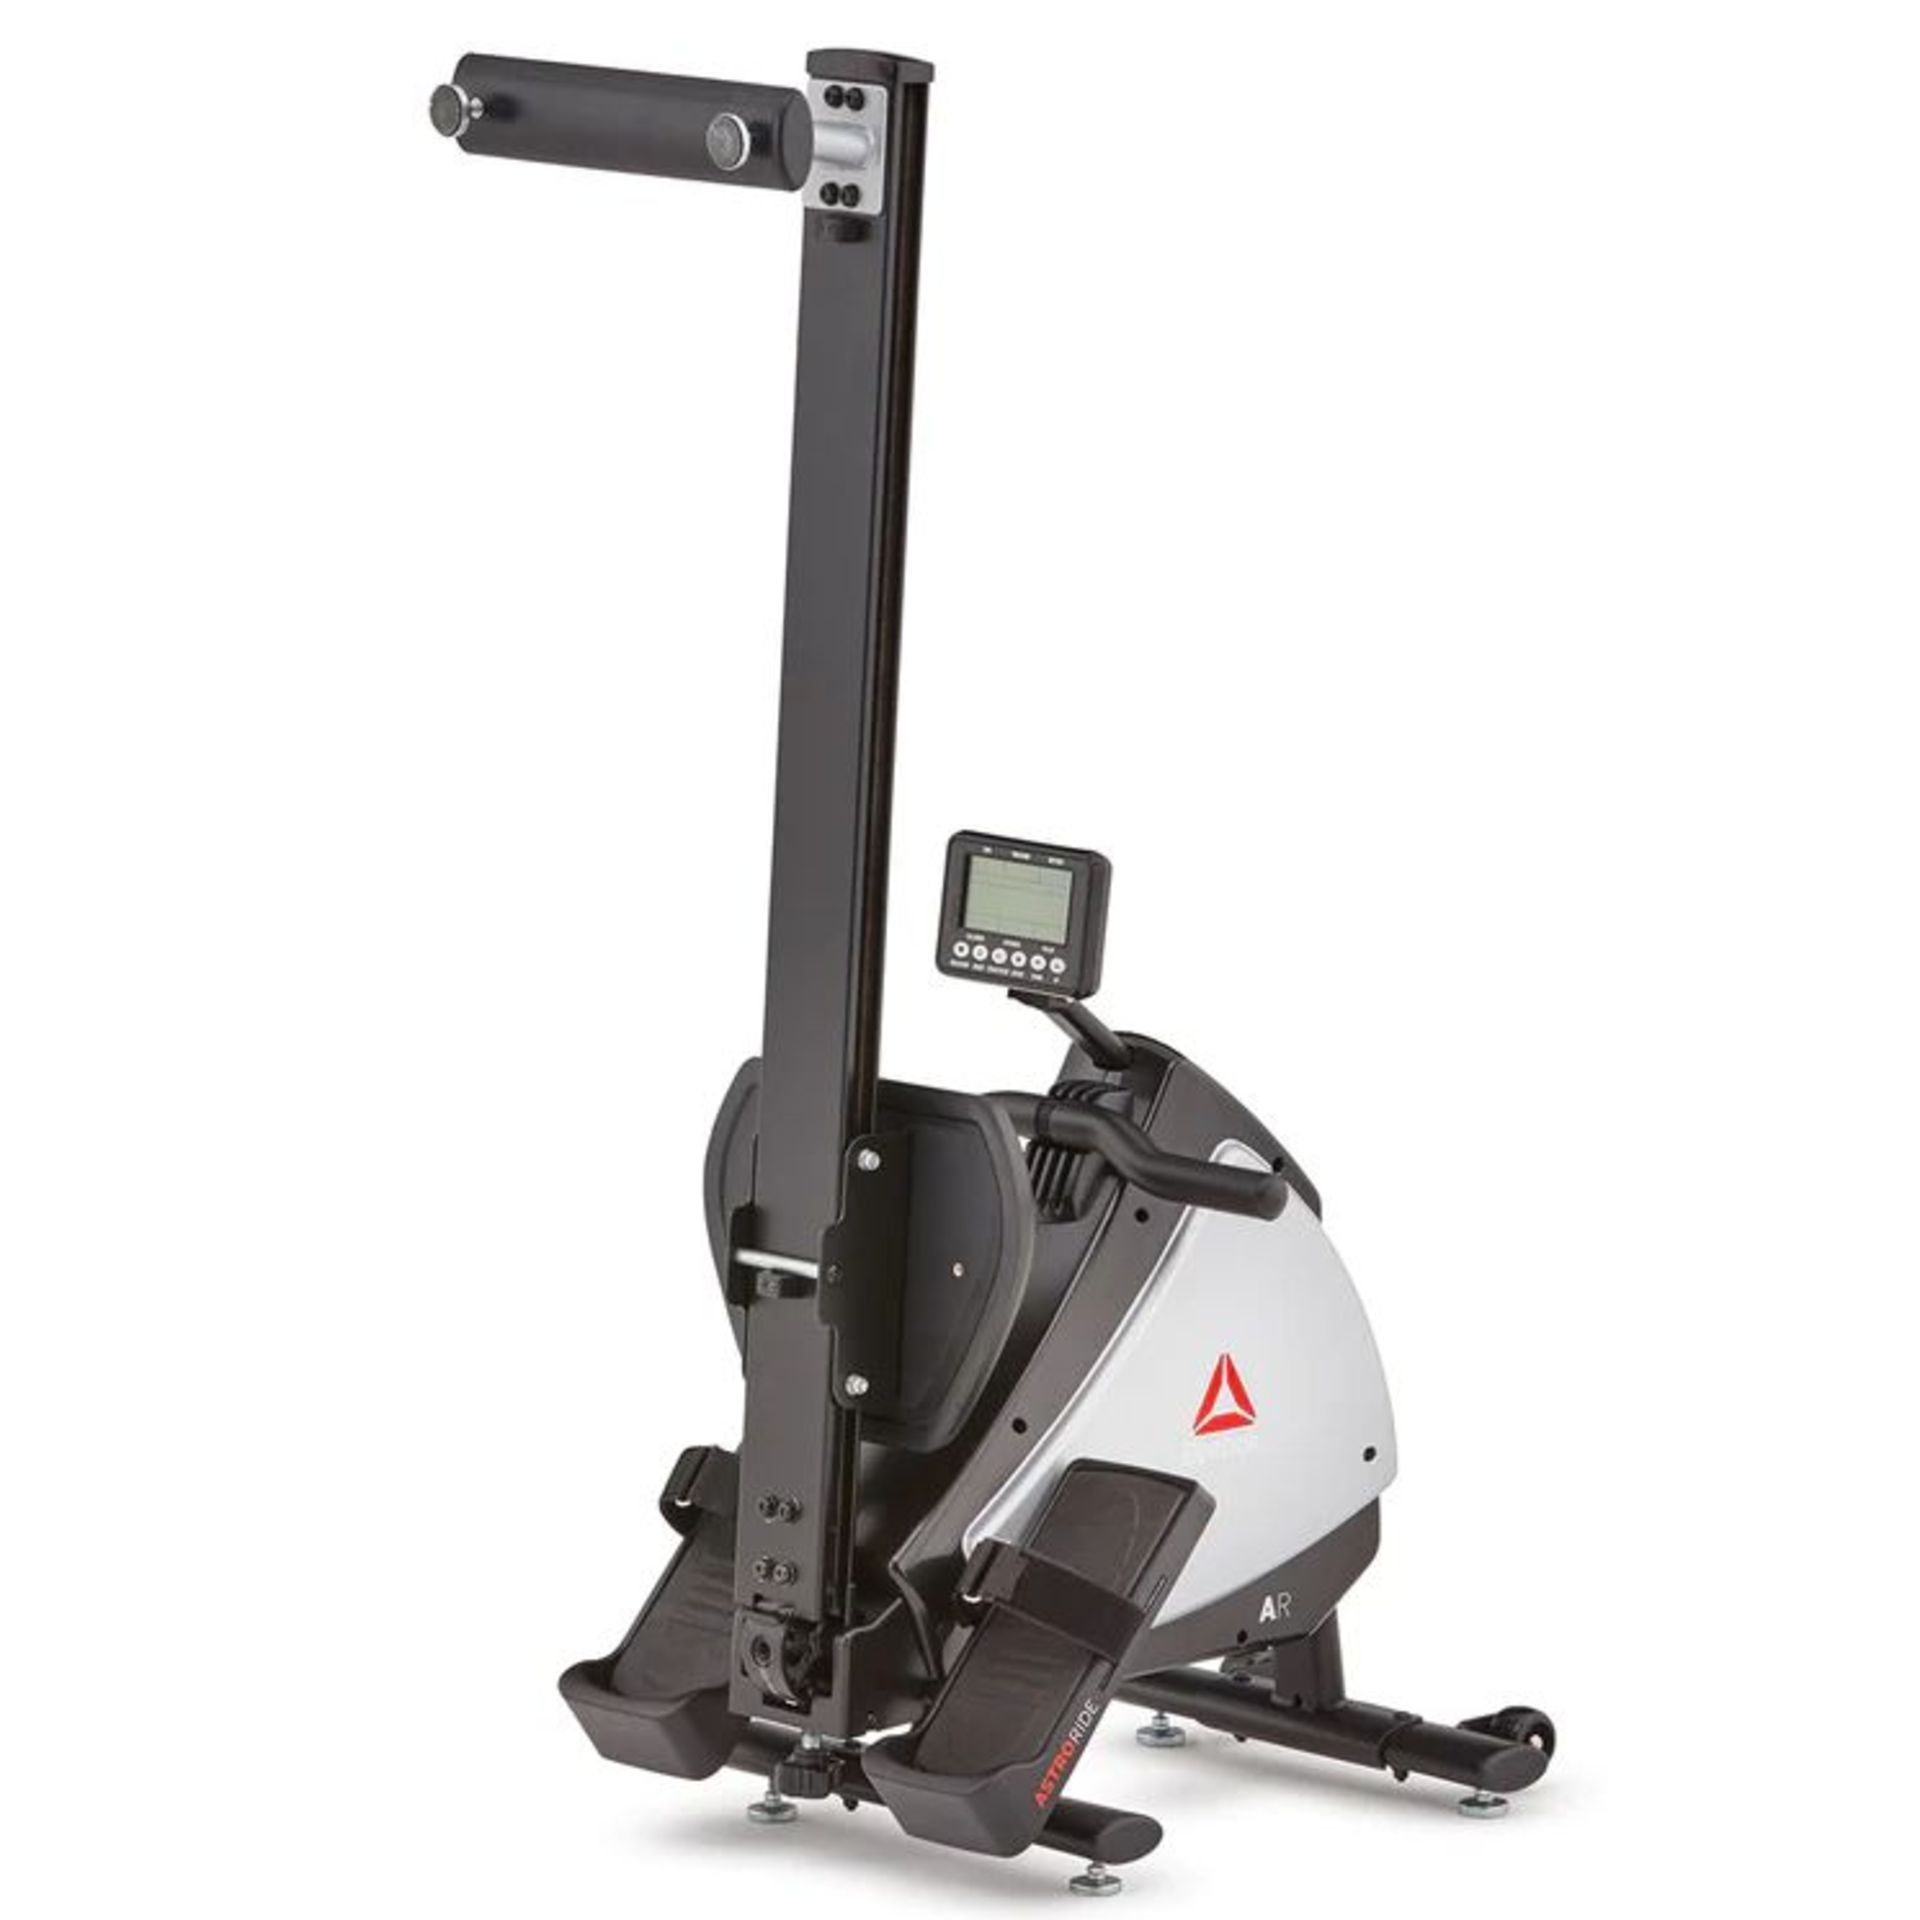 BRAND NEW REEBOK AR Rower. RRP £514.99 EACH R9-8. Designed for you to create more effective and - Image 2 of 4